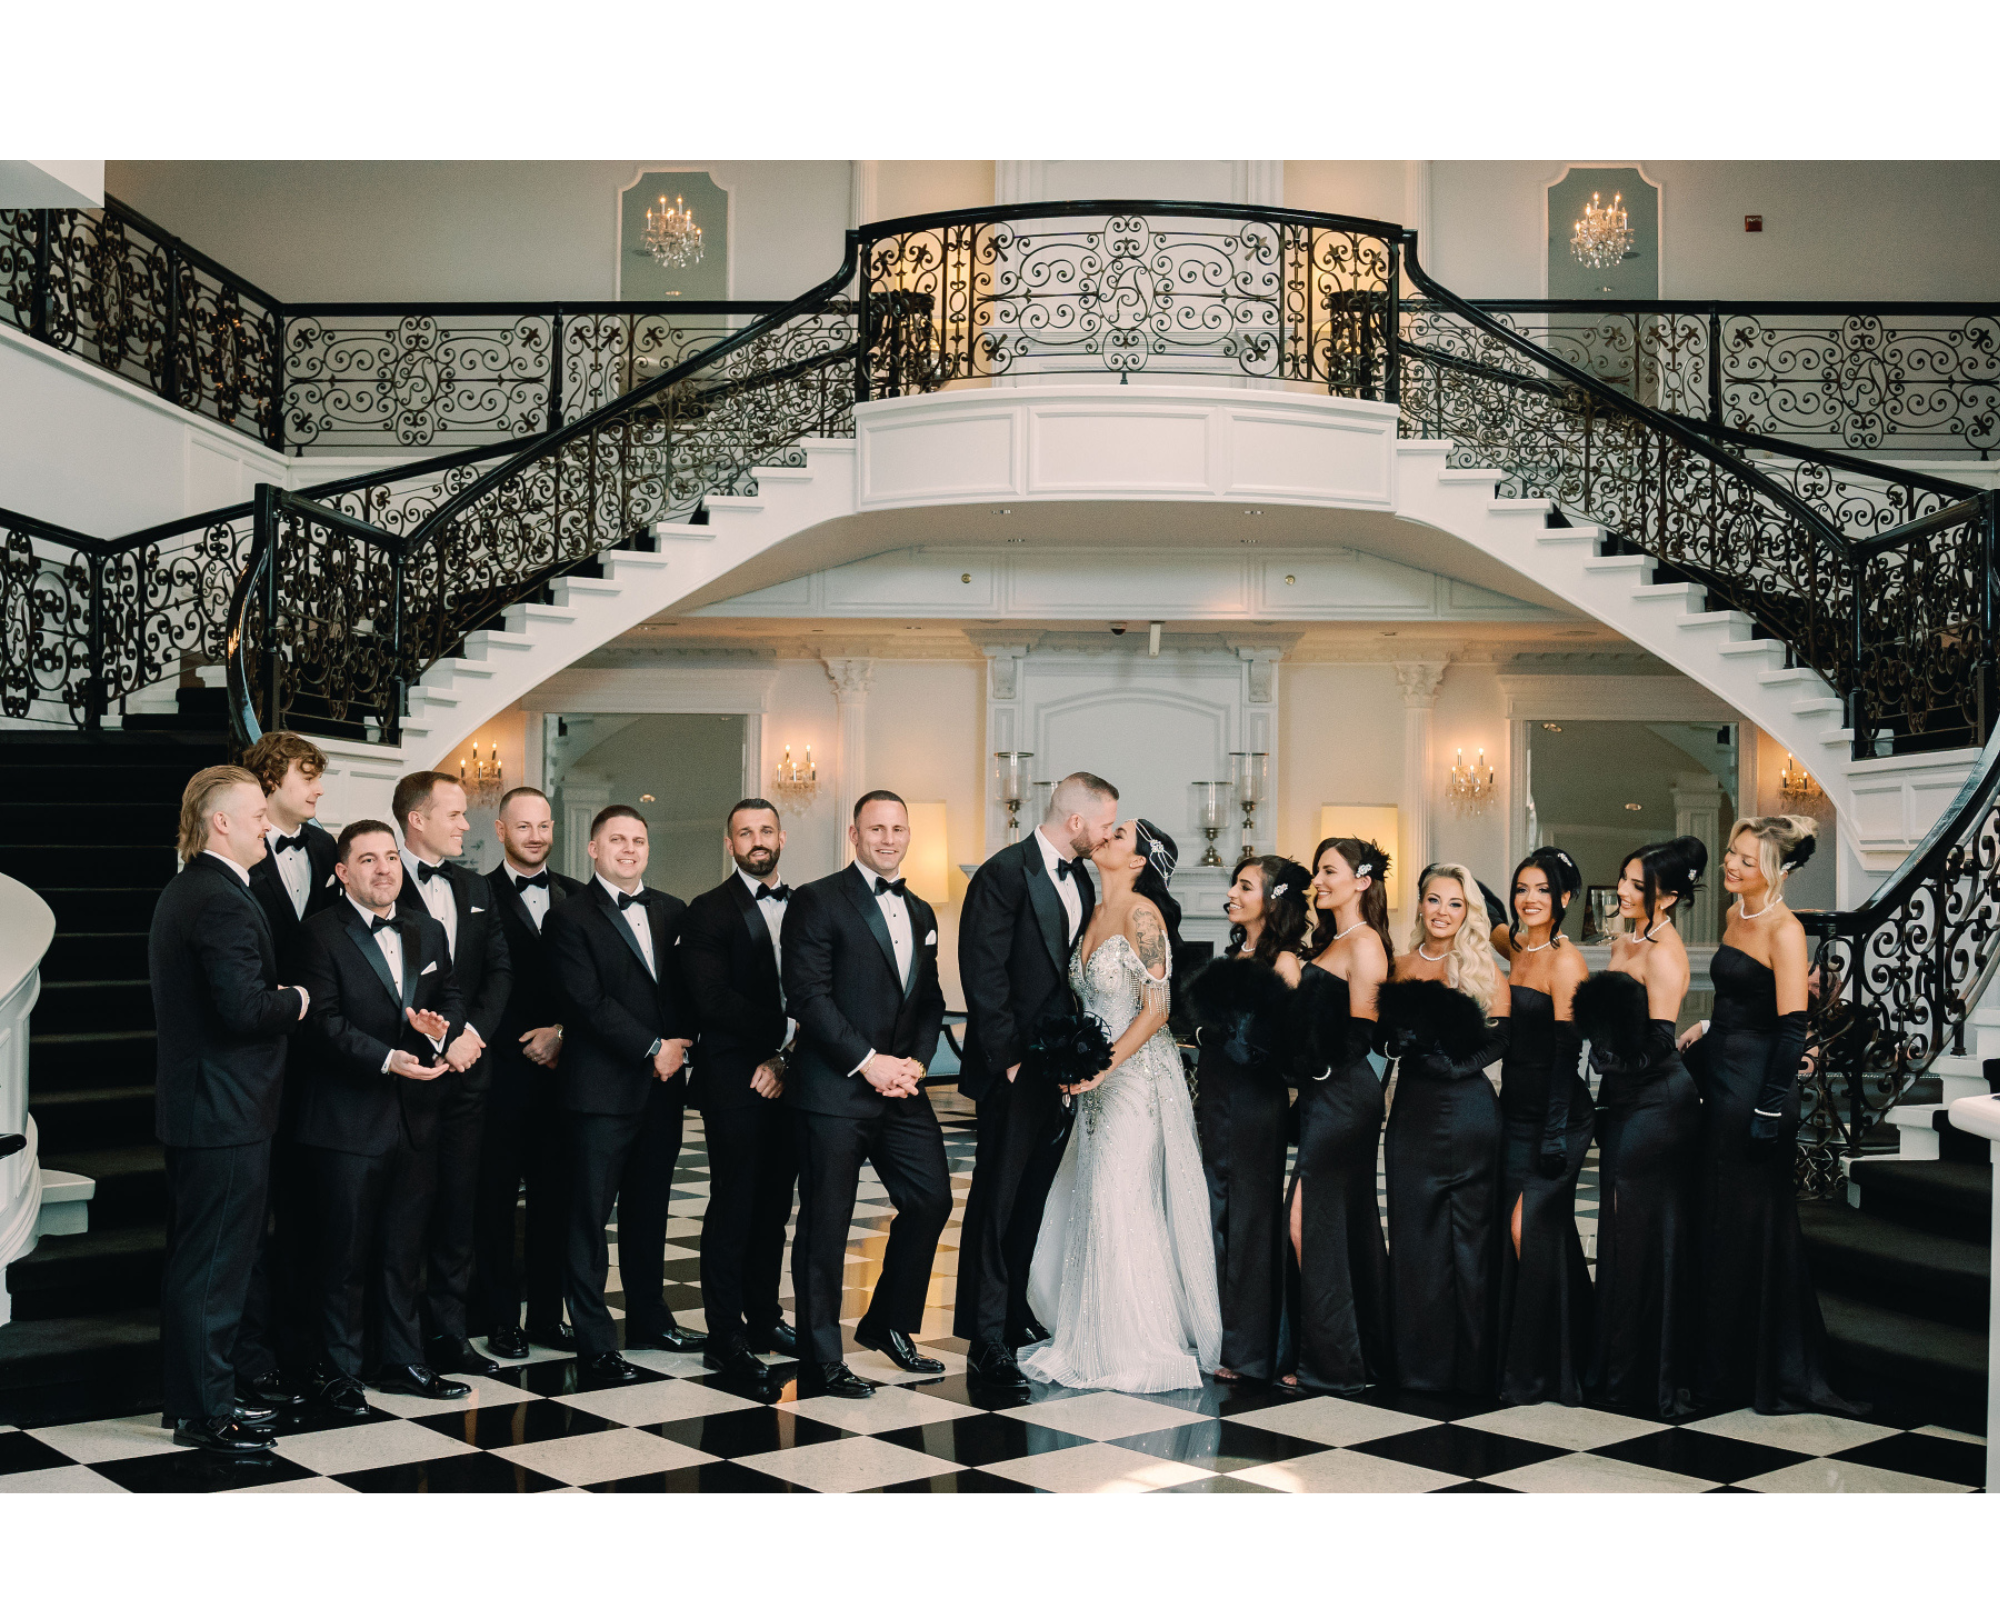 Great Gastby-inspired wedding party with black and white attire and feathers.